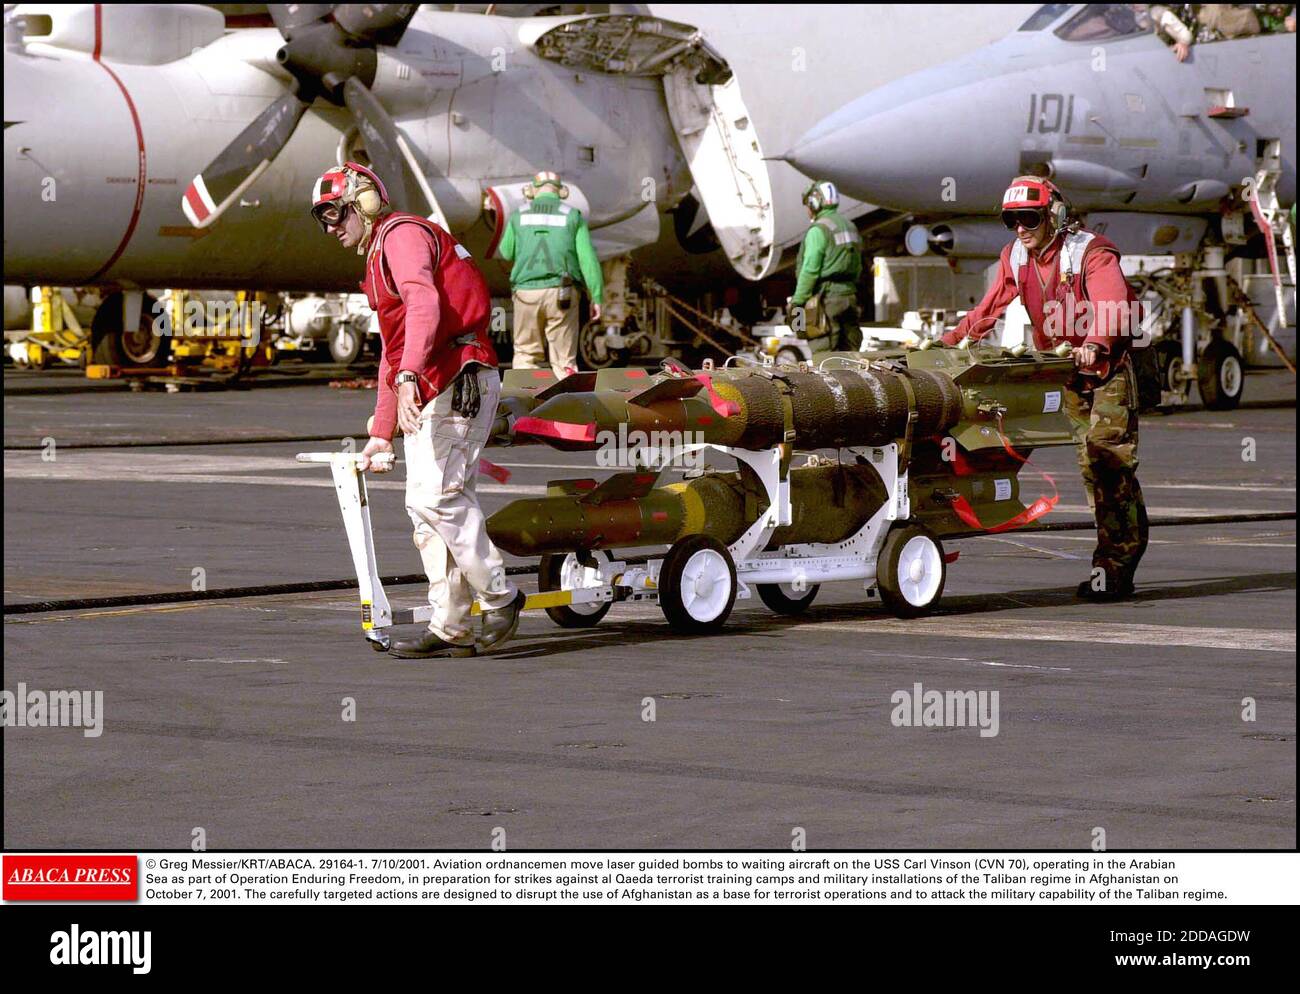 NO FILM, NO VIDEO, NO TV, NO DOCUMENTARY - © Greg Messier/KRT/ABACA. 29164-1. 7/10/2001. Aviation ordnancemen move laser guided bombs to waiting aircraft on the USS Carl Vinson (CVN 70), operating in the Arabian Sea as part of Operation Enduring Freedom, in preparation for strikes against al Qaeda Stock Photo